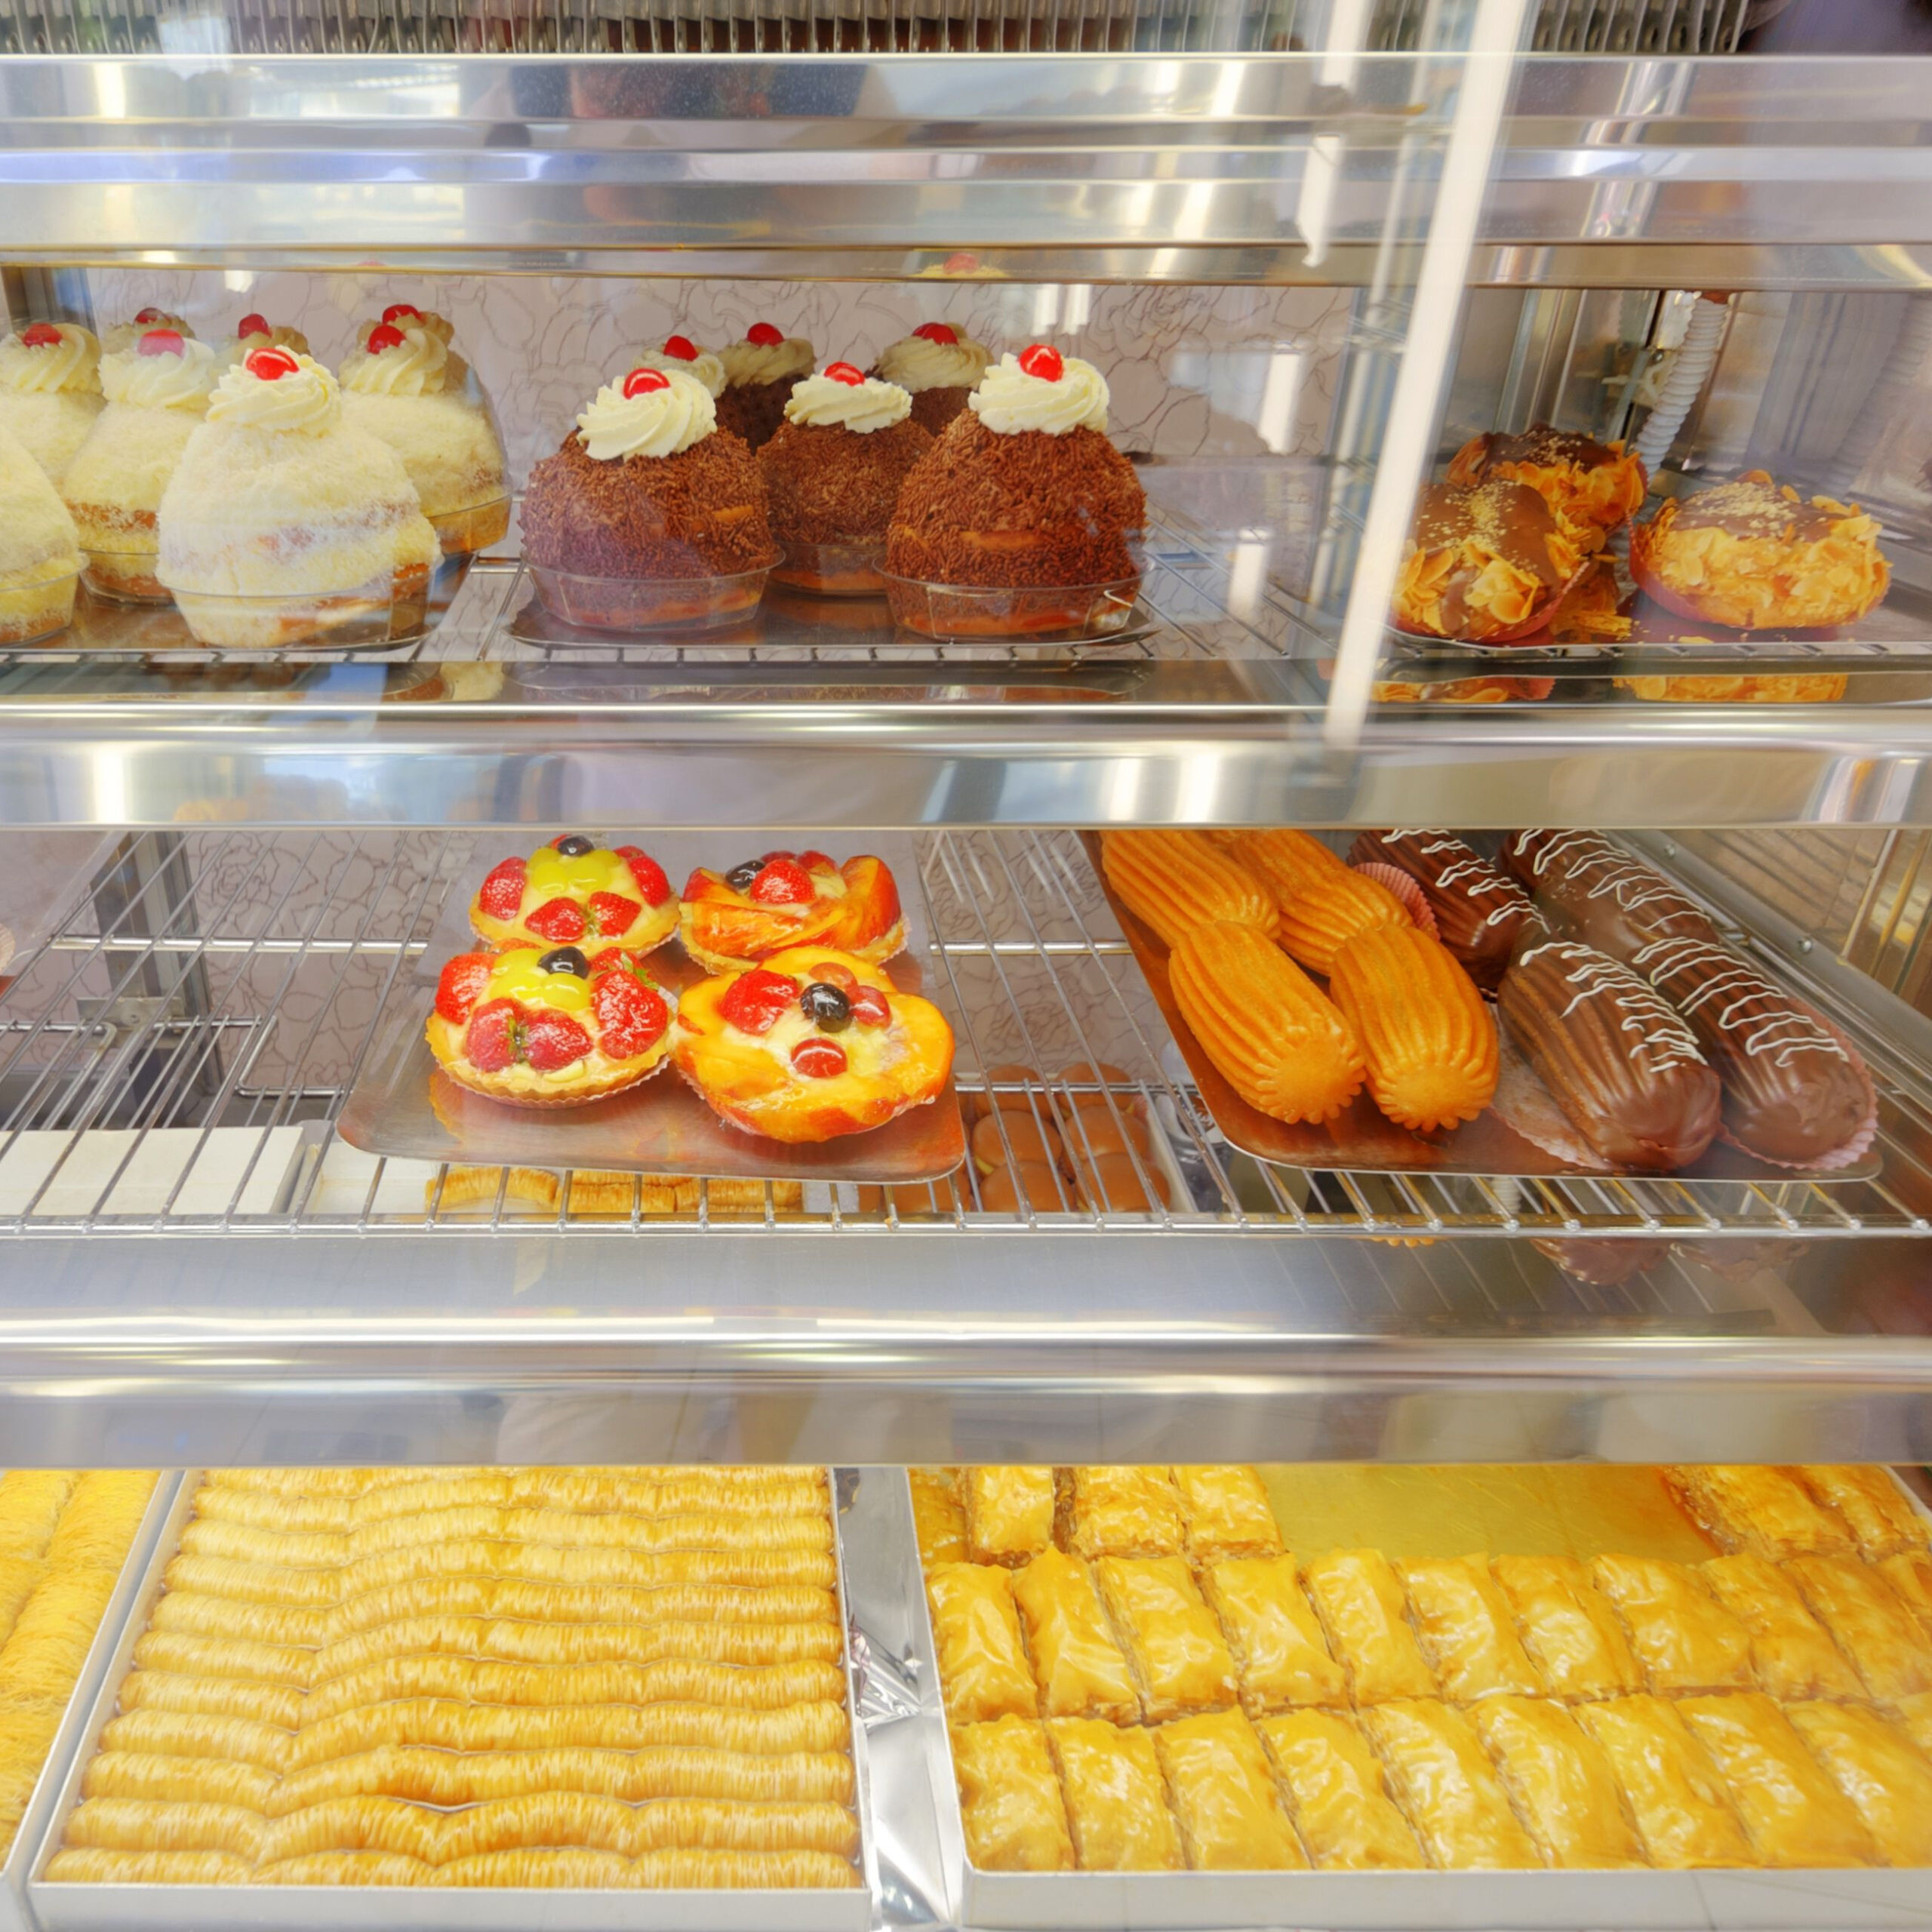 bakery case filled with breakfast pastries